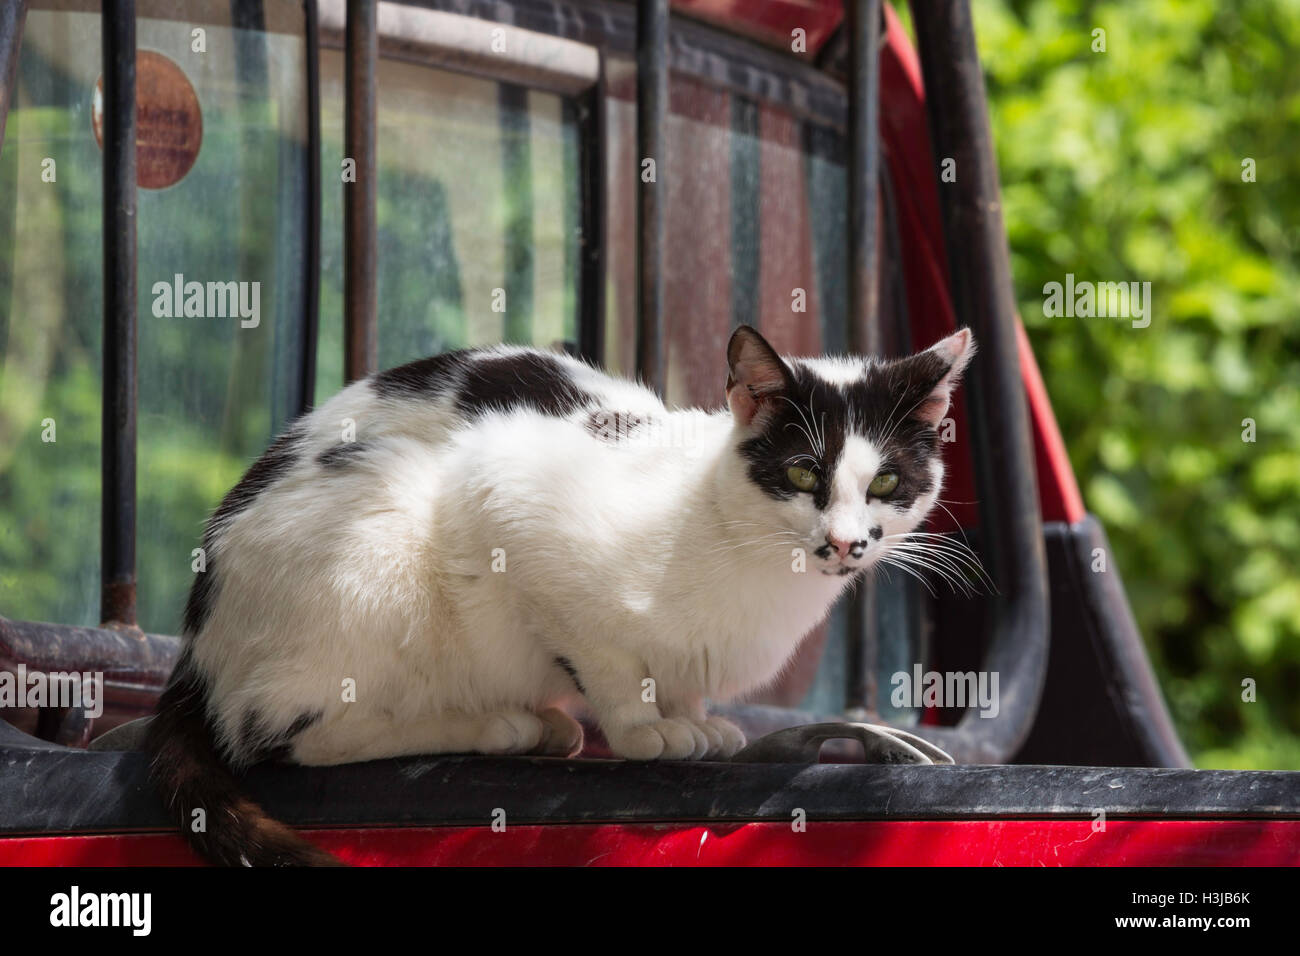 Black and white cat perching on a red pick-up truck. Stock Photo